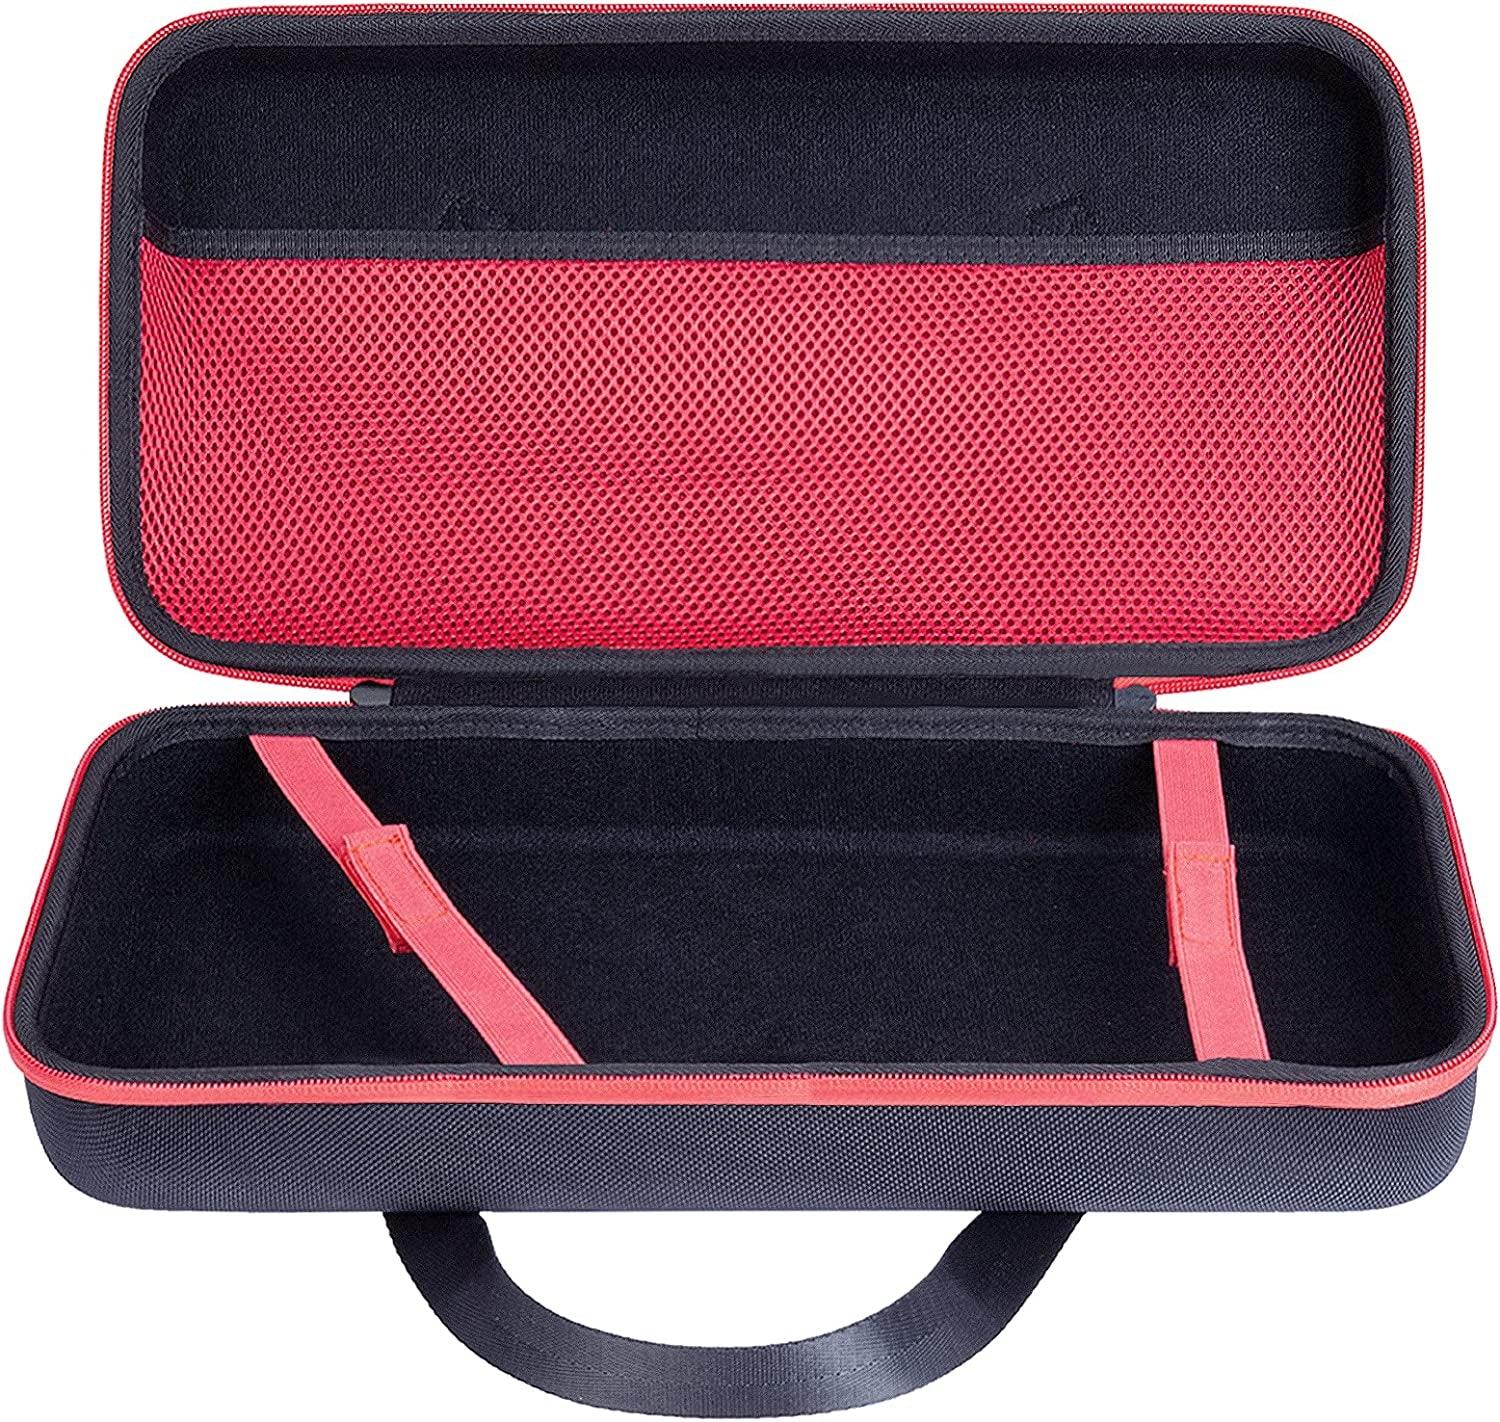 Hard Tool Case Replacement for Milwaukee 2719-20 M18 FUEL Cordless Hackzall Reciprocating Saw